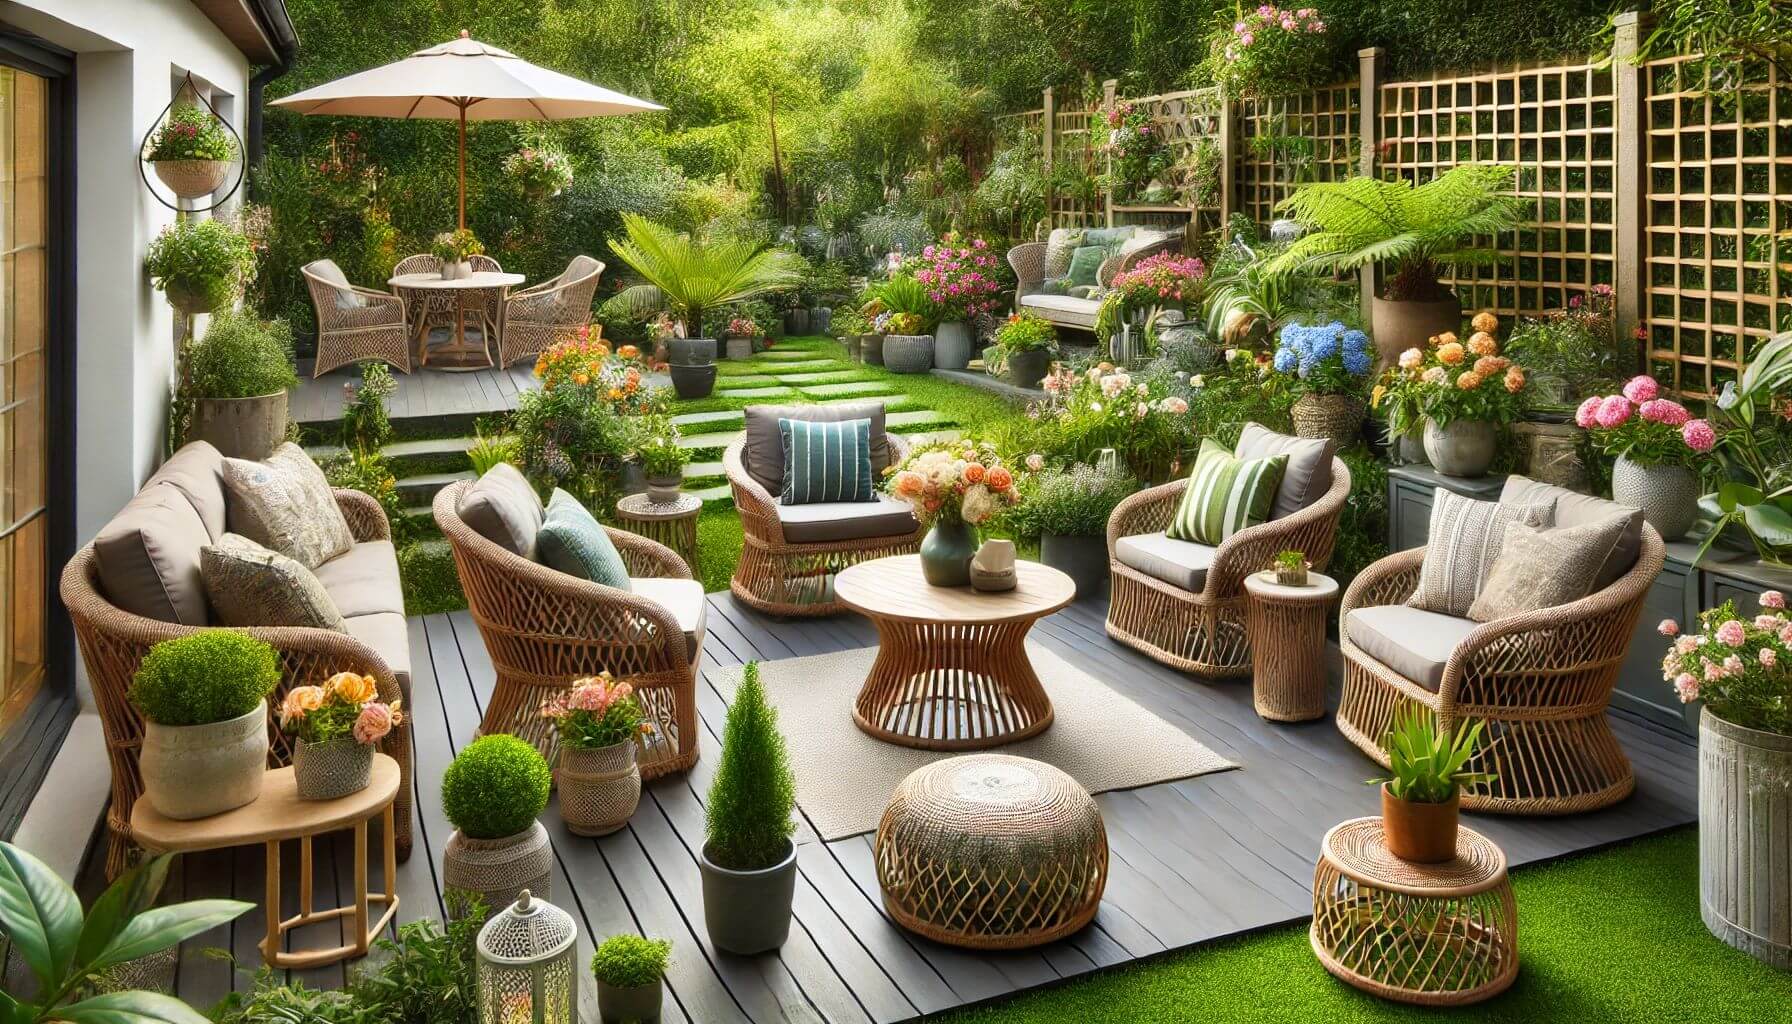 How to Find The Best Rattan Garden Furniture: 17 Tips